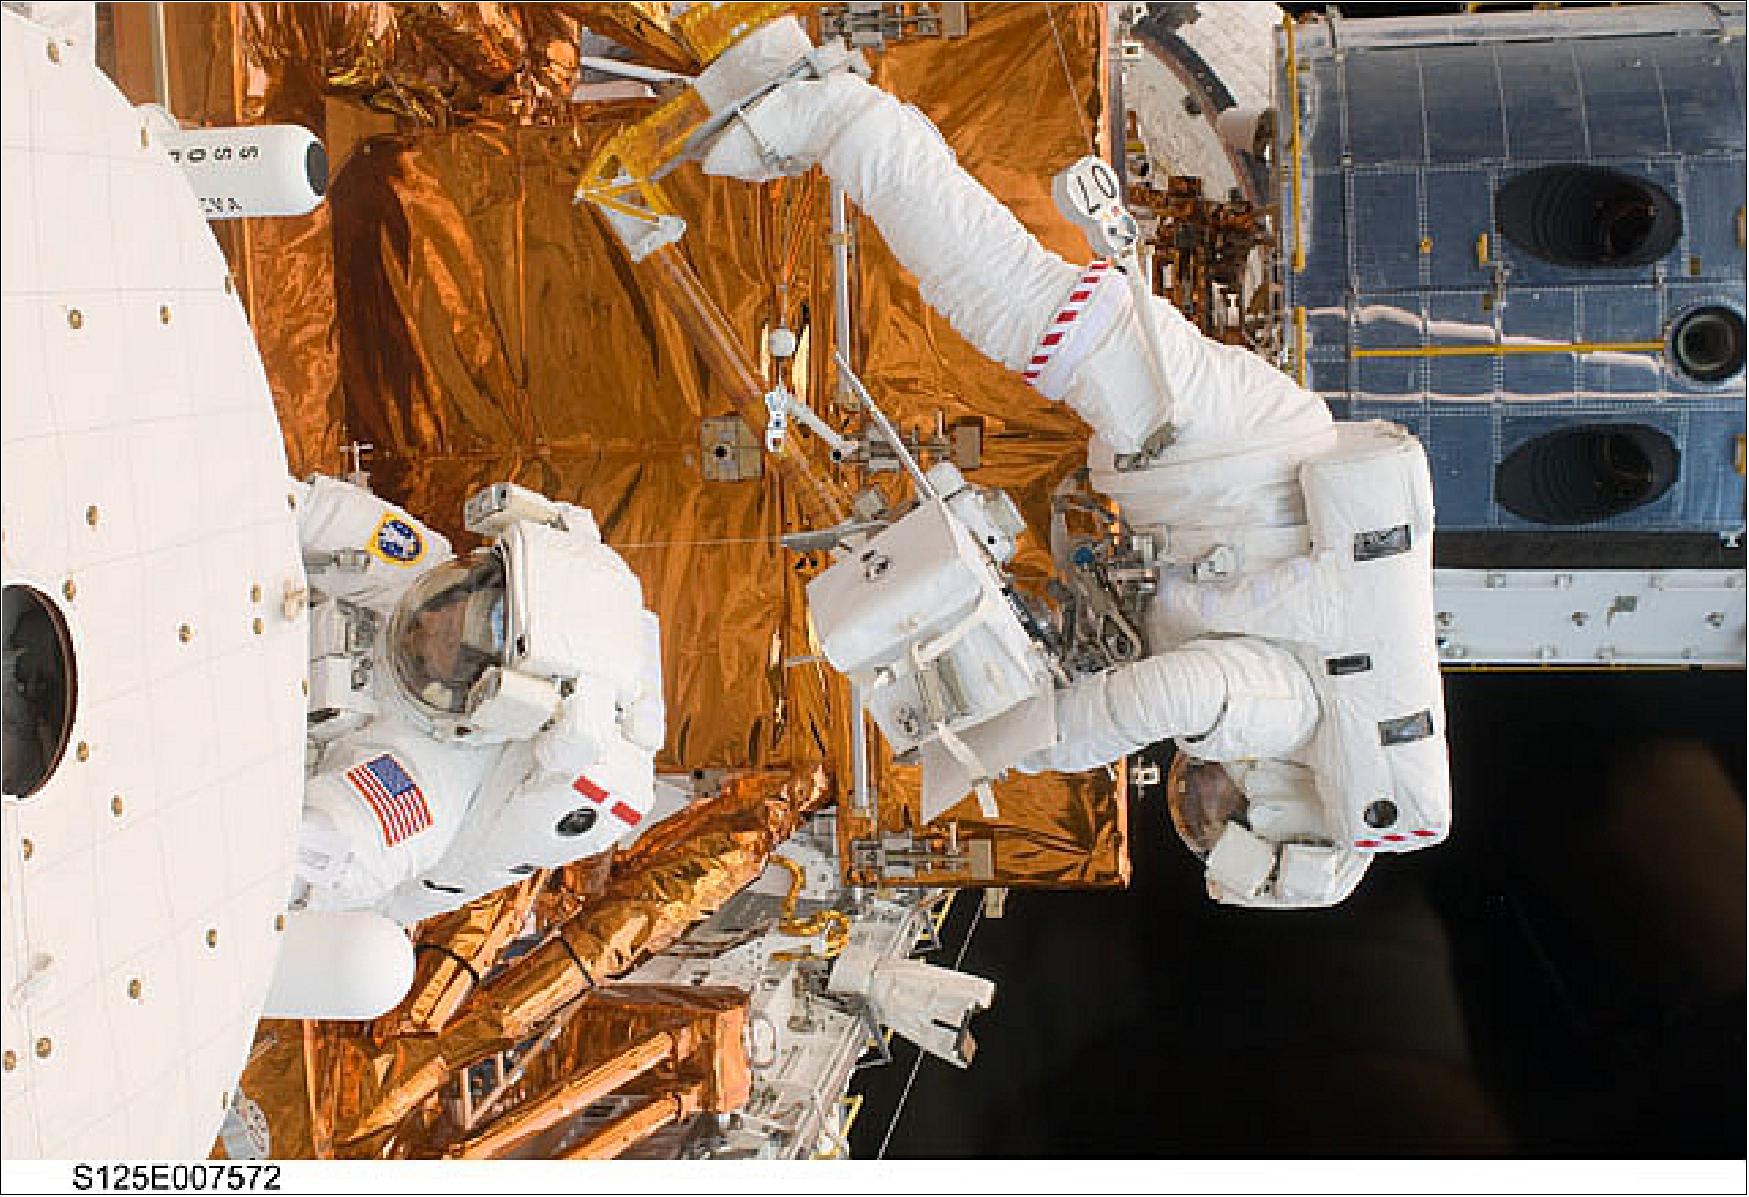 Figure 68: Astronaut Michael Good works with the Hubble Space Telescope in the cargo bay of the Earth-orbiting Space Shuttle Atlantis along with Mike Massimino (image credit: NASA)